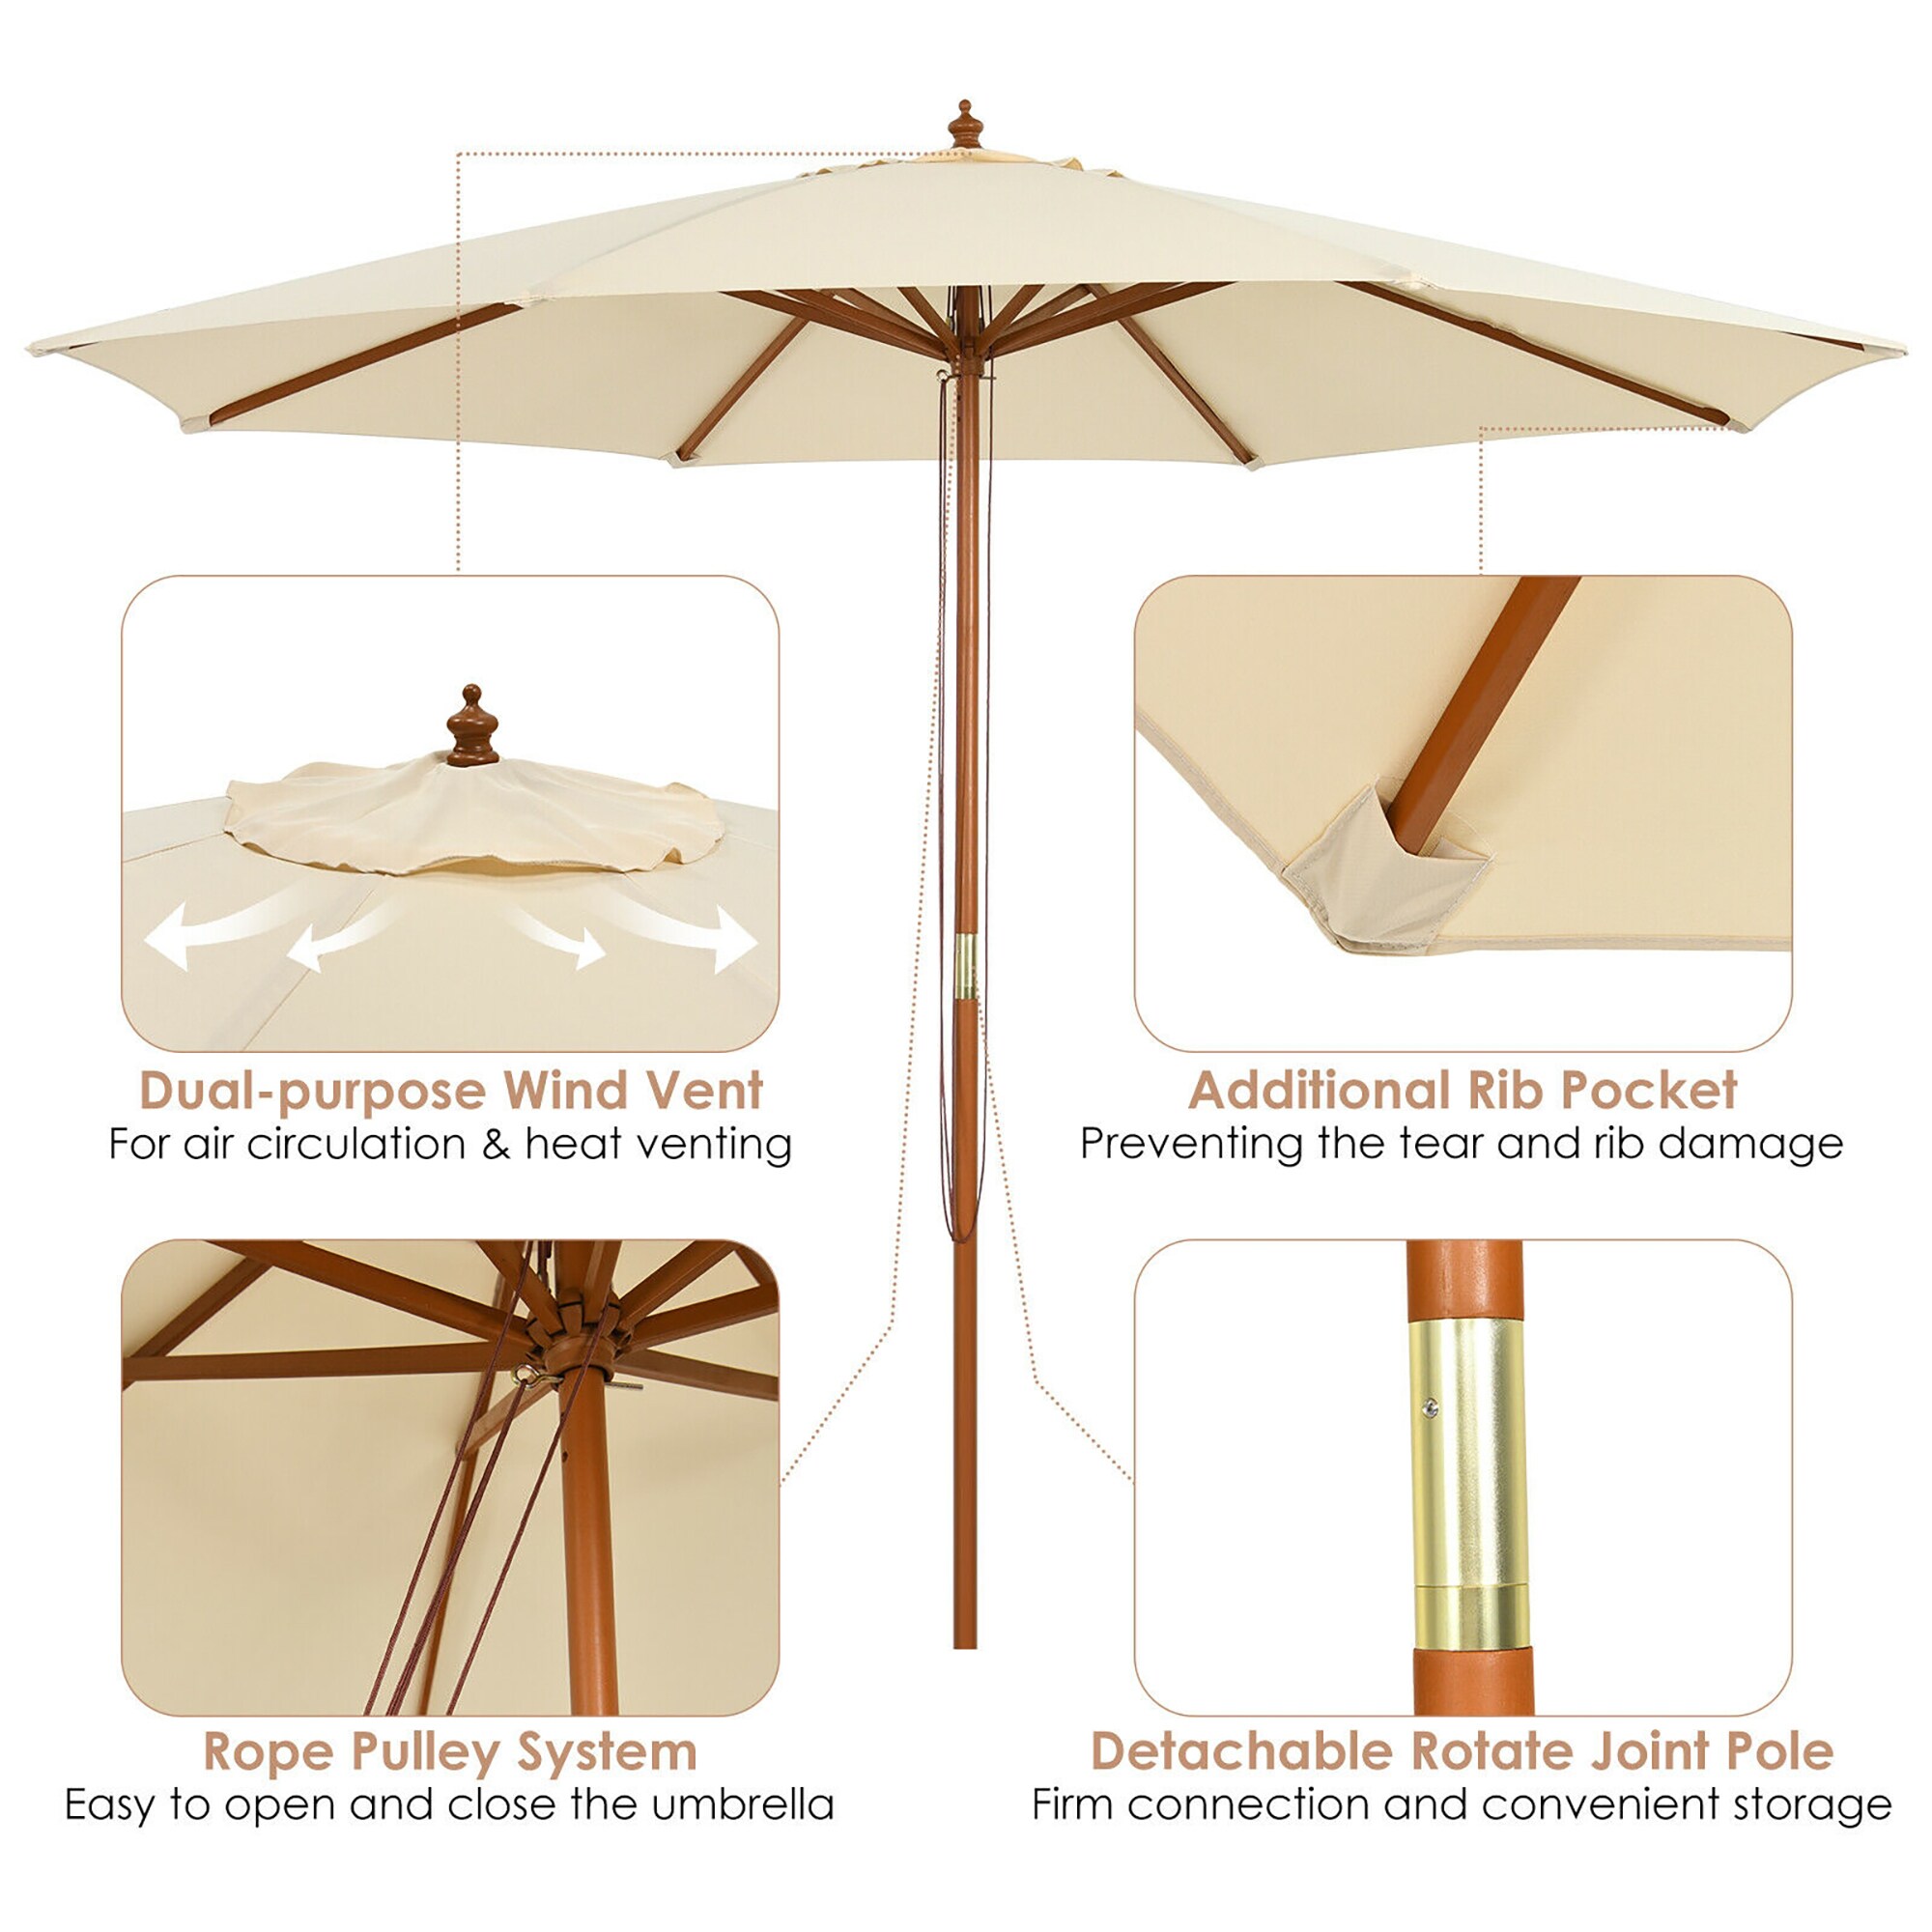 Forclover 10 ft Brown Wood Market Patio Umbrella with Bamboo Ribs